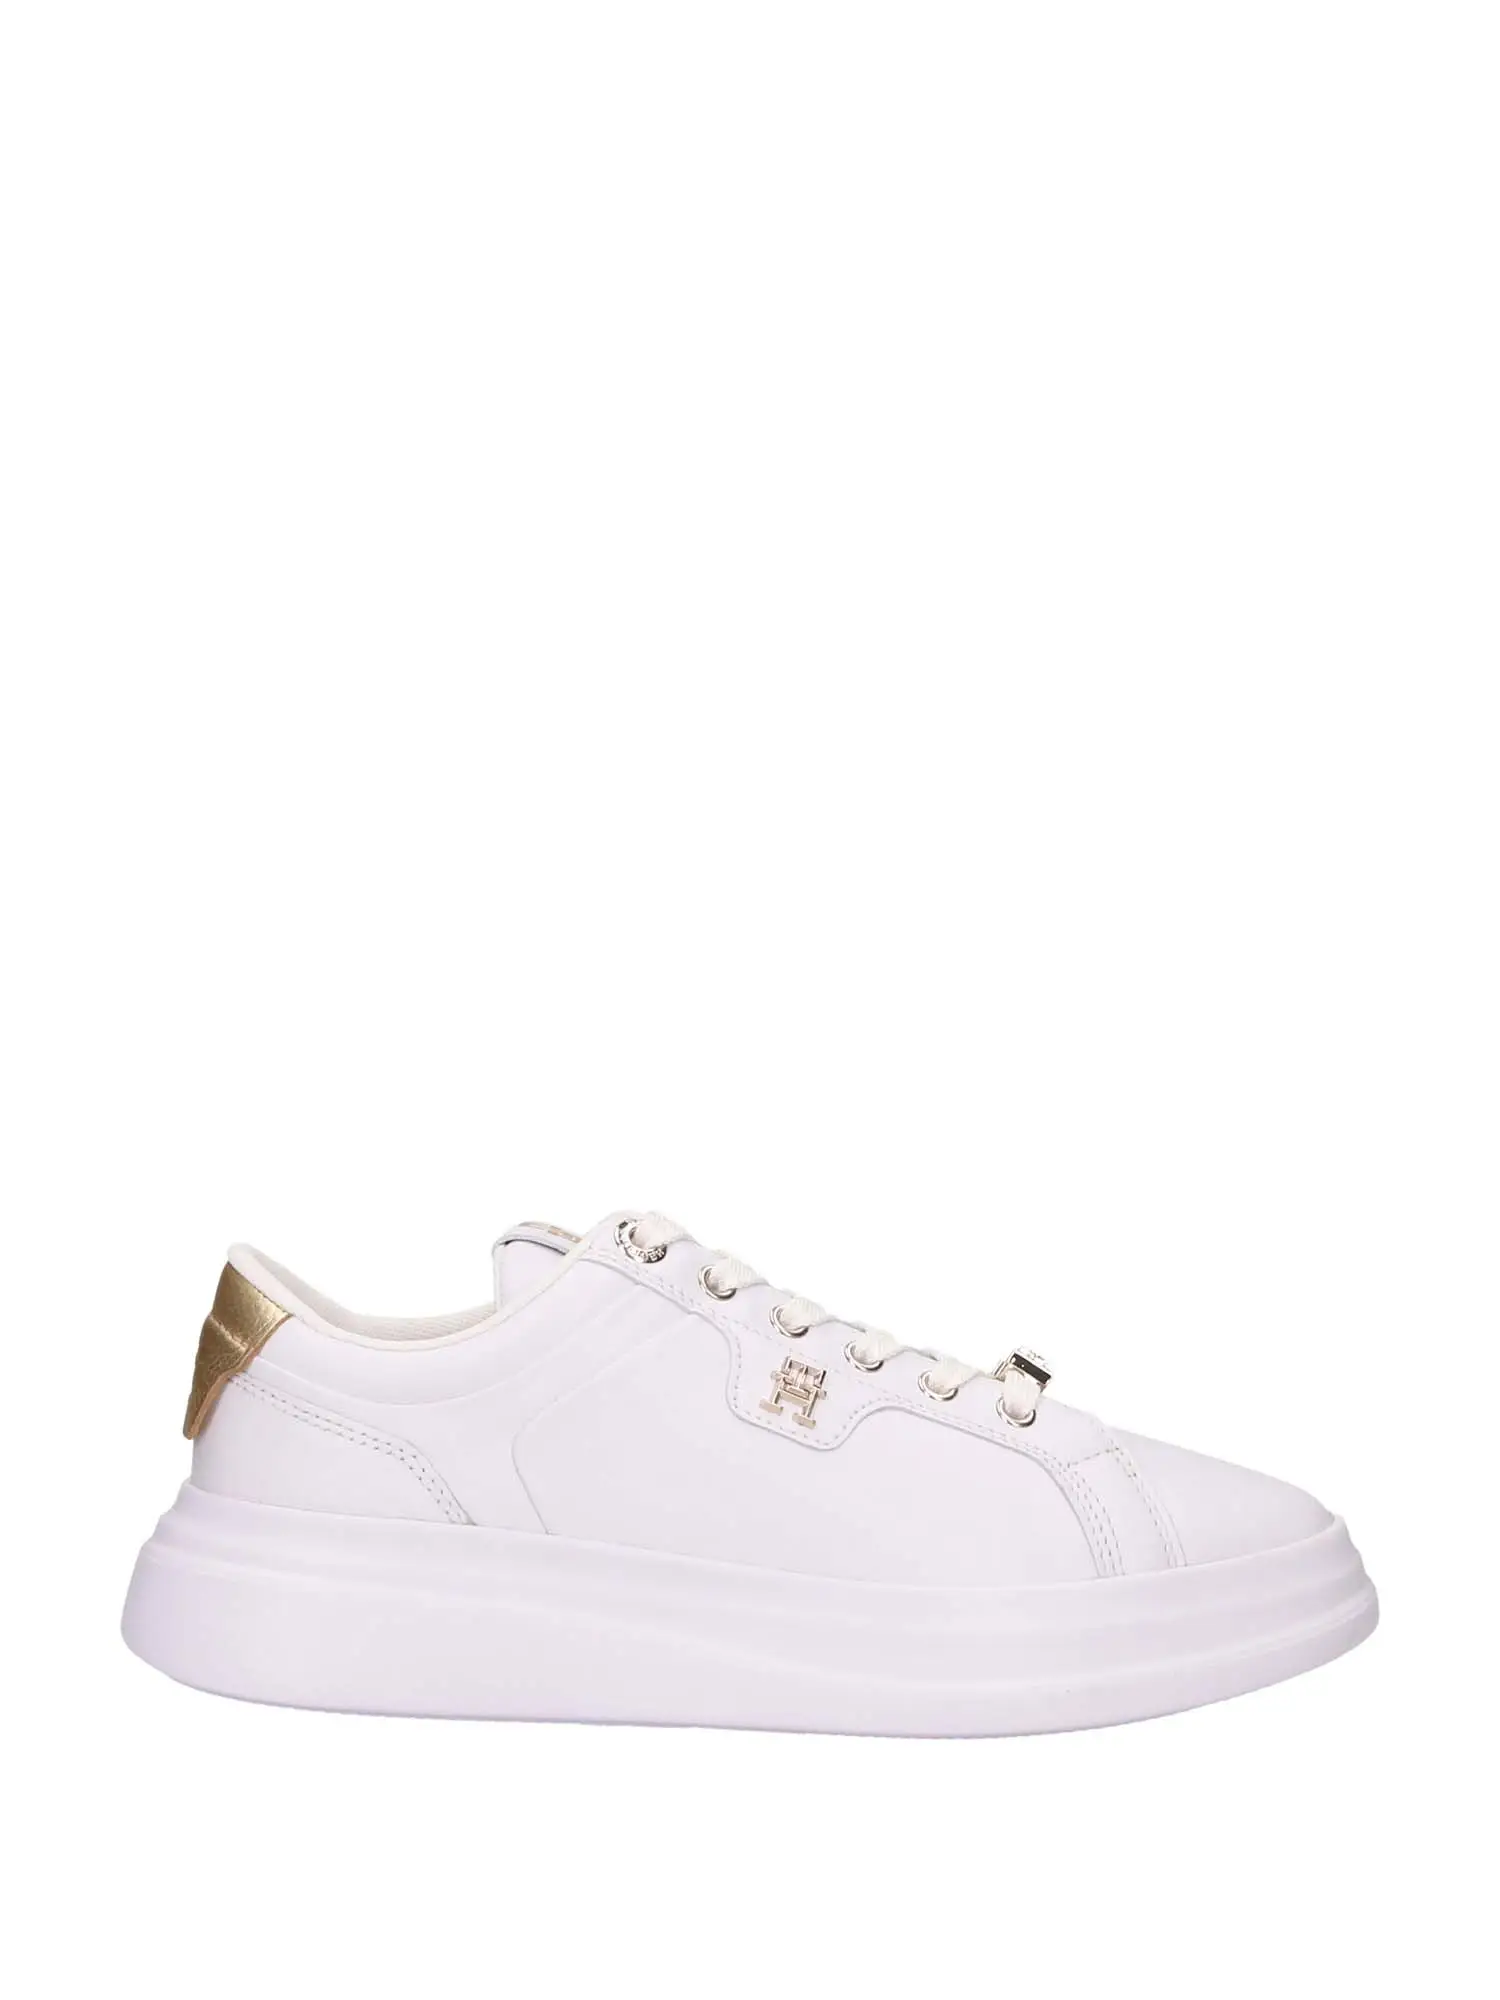 SNEAKERS DONNA - TOMMY HILFIGER - FW0FW07780 - BIANCO/ORO, 38